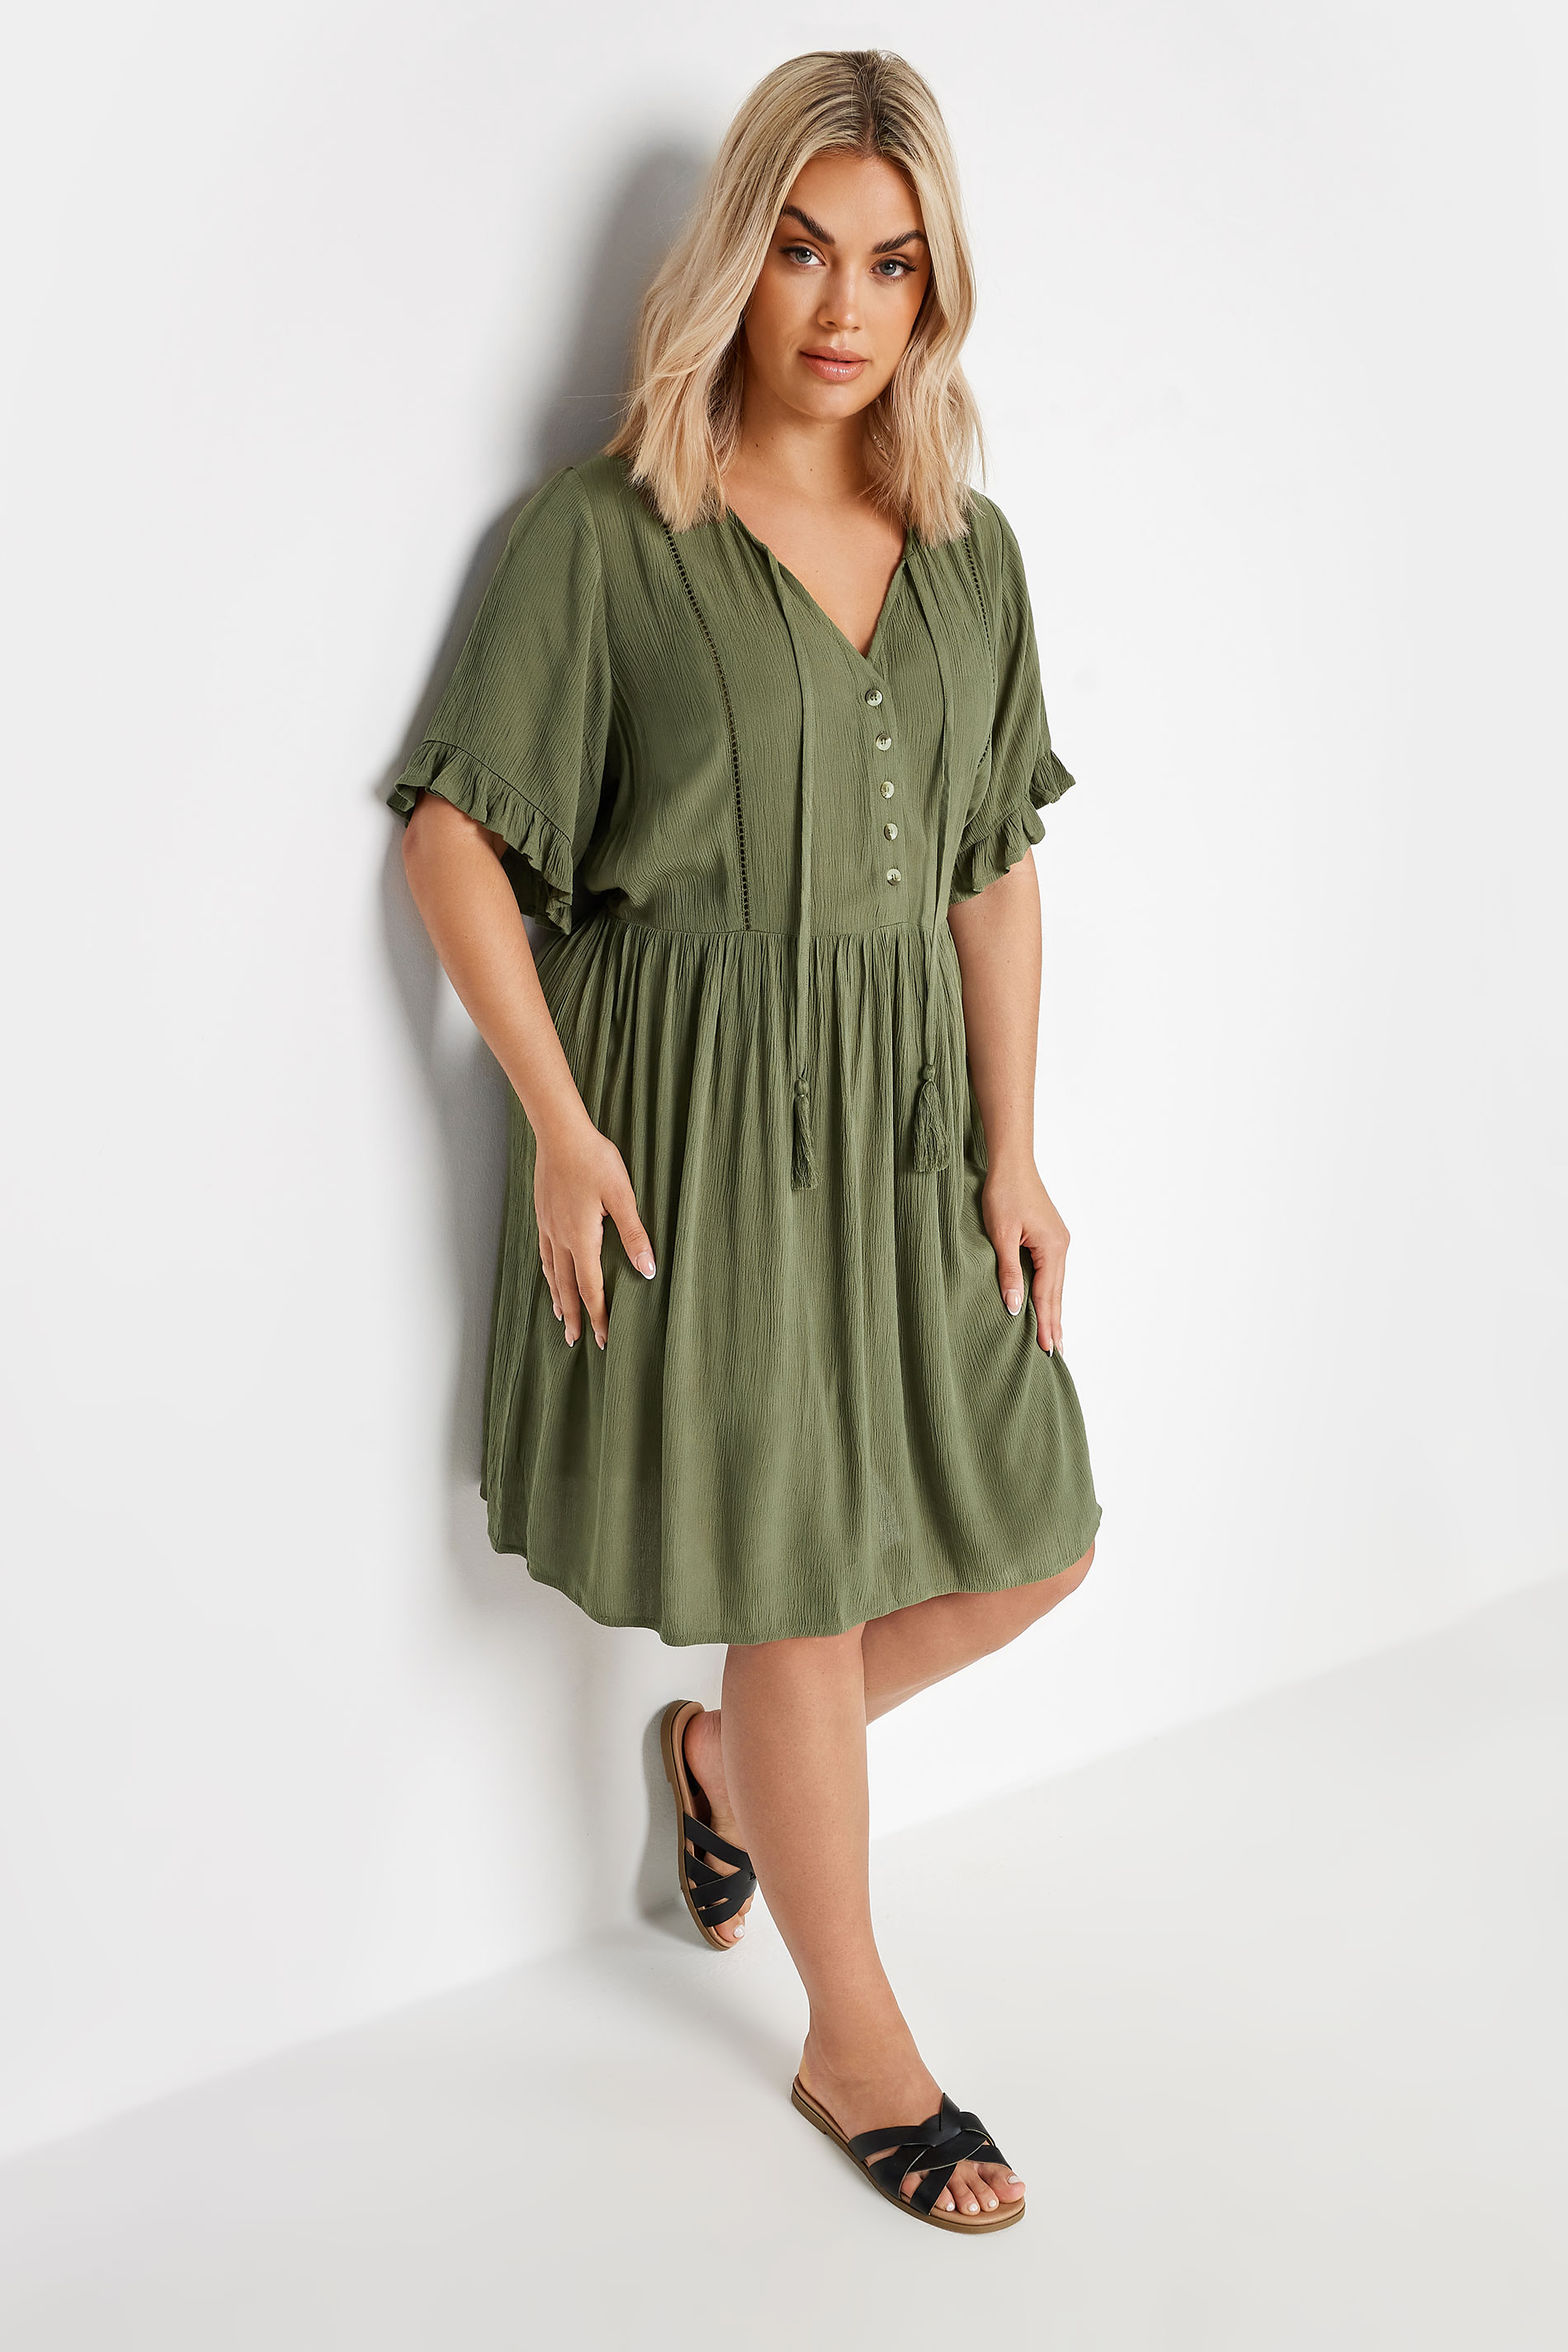 YOURS Plus Size Khaki Green Crinkle Tie Neck Dress | Yours Clothing 2